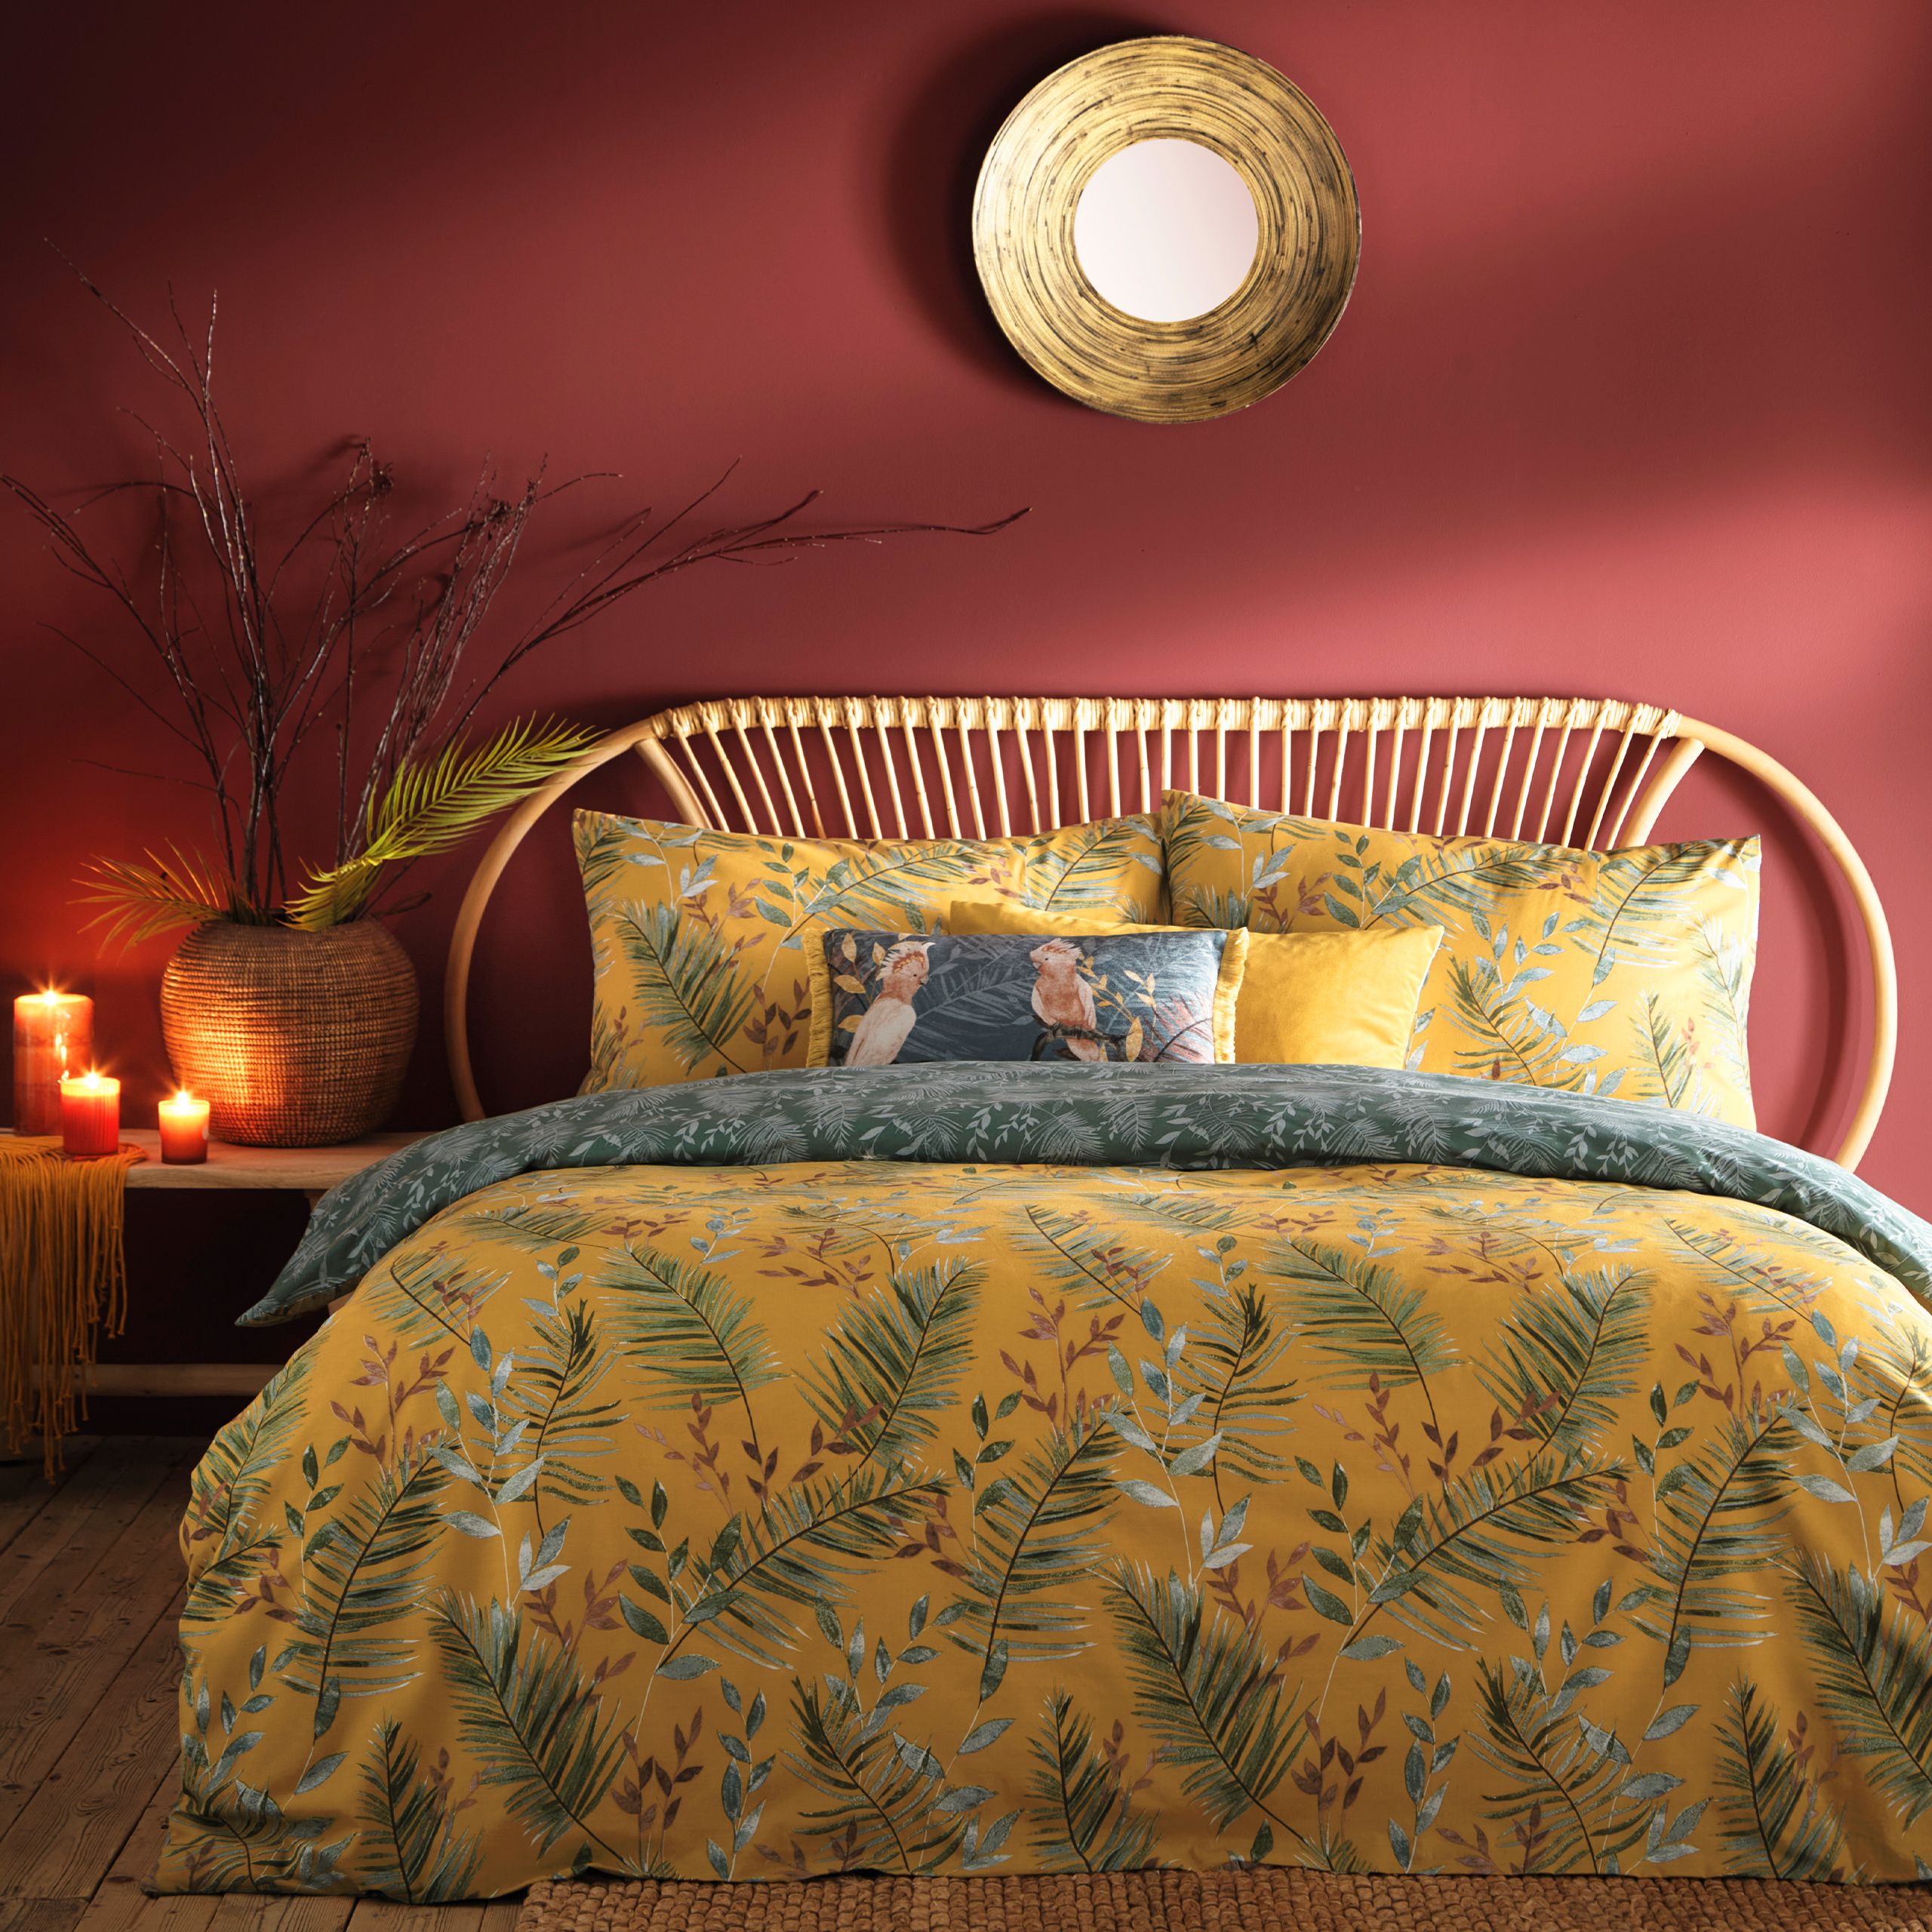 The Mazari Duvet Cover and Pillow Case Set is a jungle-inspired hand-printed design. Made from a crisp Polycotton, this vibrant and exotic bedding set is complete with a teal toned reverse, clear button closure and easy care properties.
Measurements are as below for each size in this range;
Single: 137 x 200cm (includes one matching pillowcase)
Double: 200 200cm (includes two matching pillowcases)
King: 230 x 220cm (includes two matching pillowcases)
Super King: 260 x 220cm (includes two matching pillowcases)